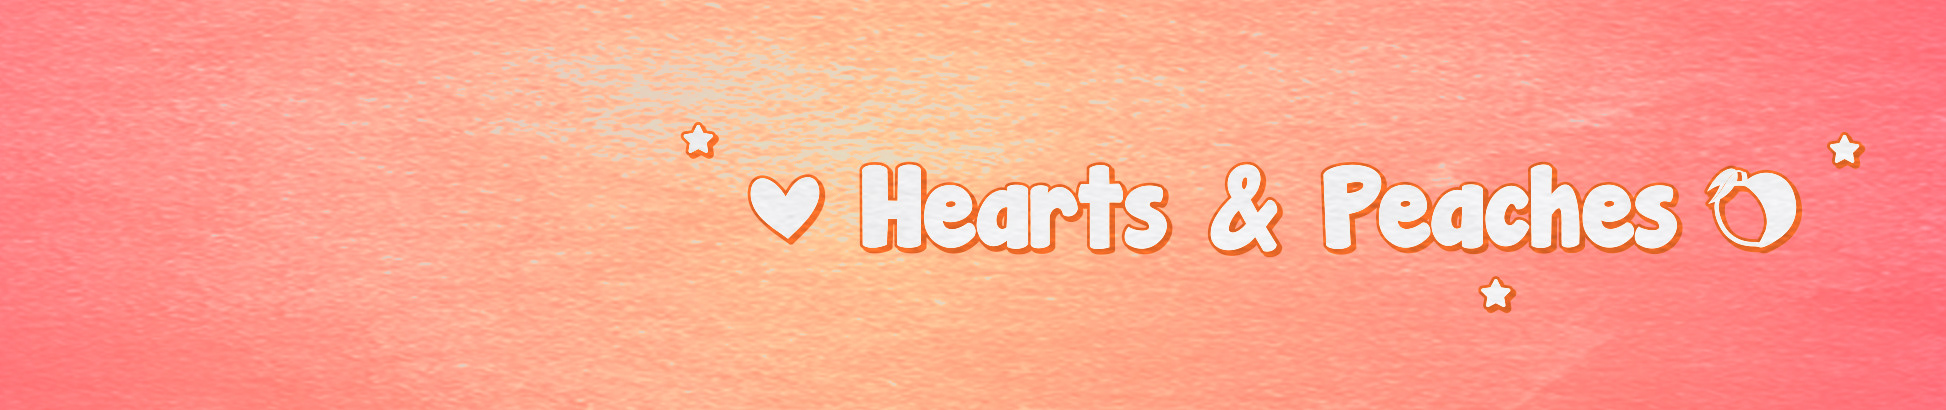 Hearts and Peaches's profile banner